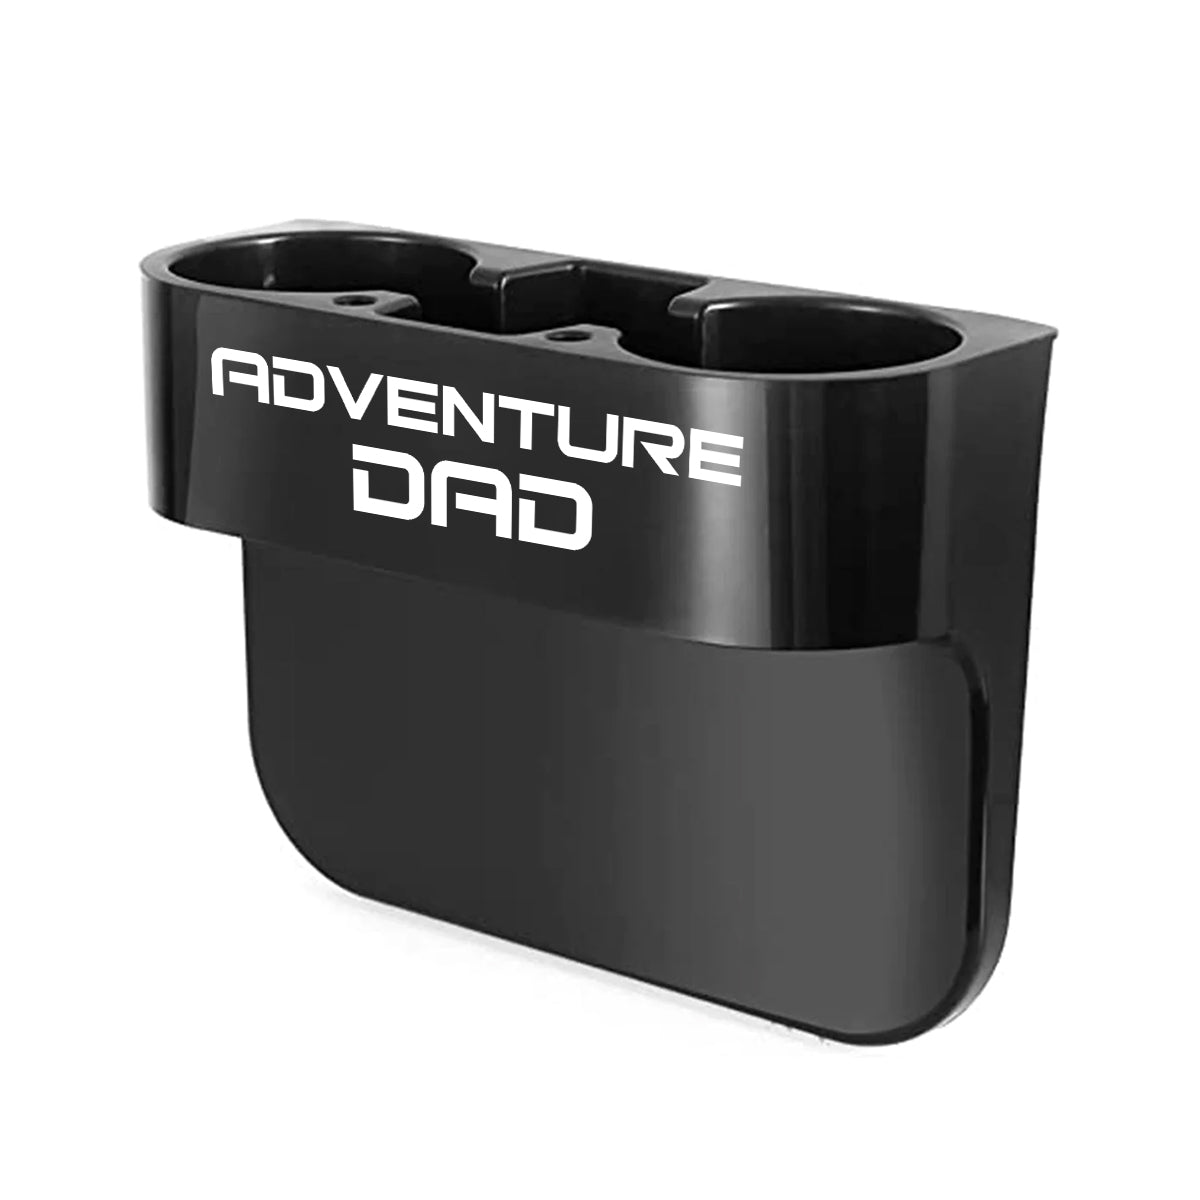 Cup Holder Portable Multifunction Vehicle Seat Cup Cell Phone Drinks Holder Box Car Interior Organizer,Happy Father' s Day, Adventure Dad, Custom For Your Cars, Car Accessories KX11995,Gift for Daddy 04